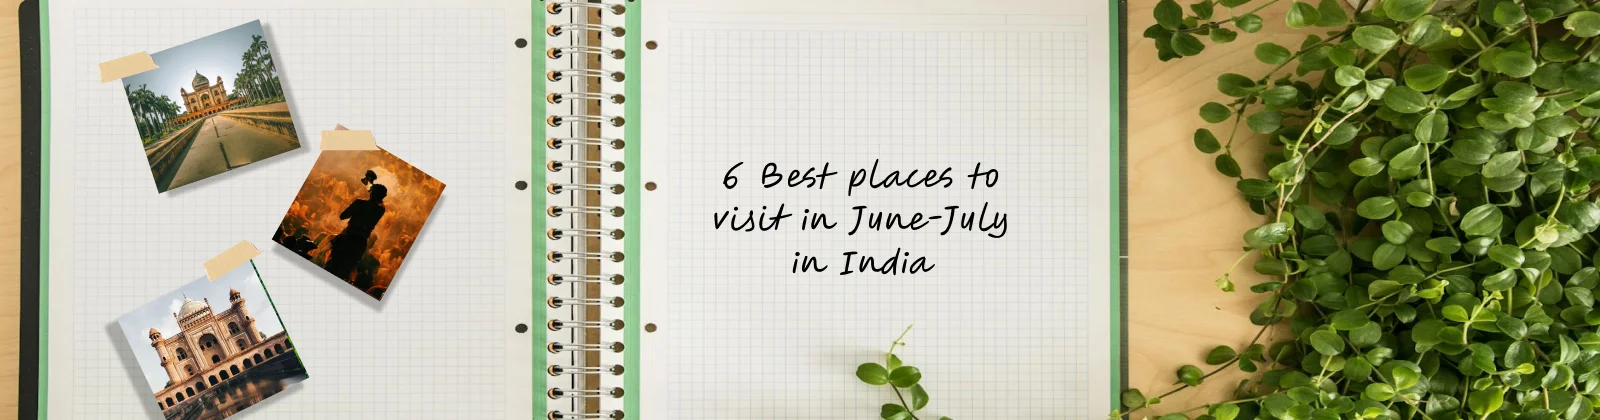 Best Places to visit in India in June